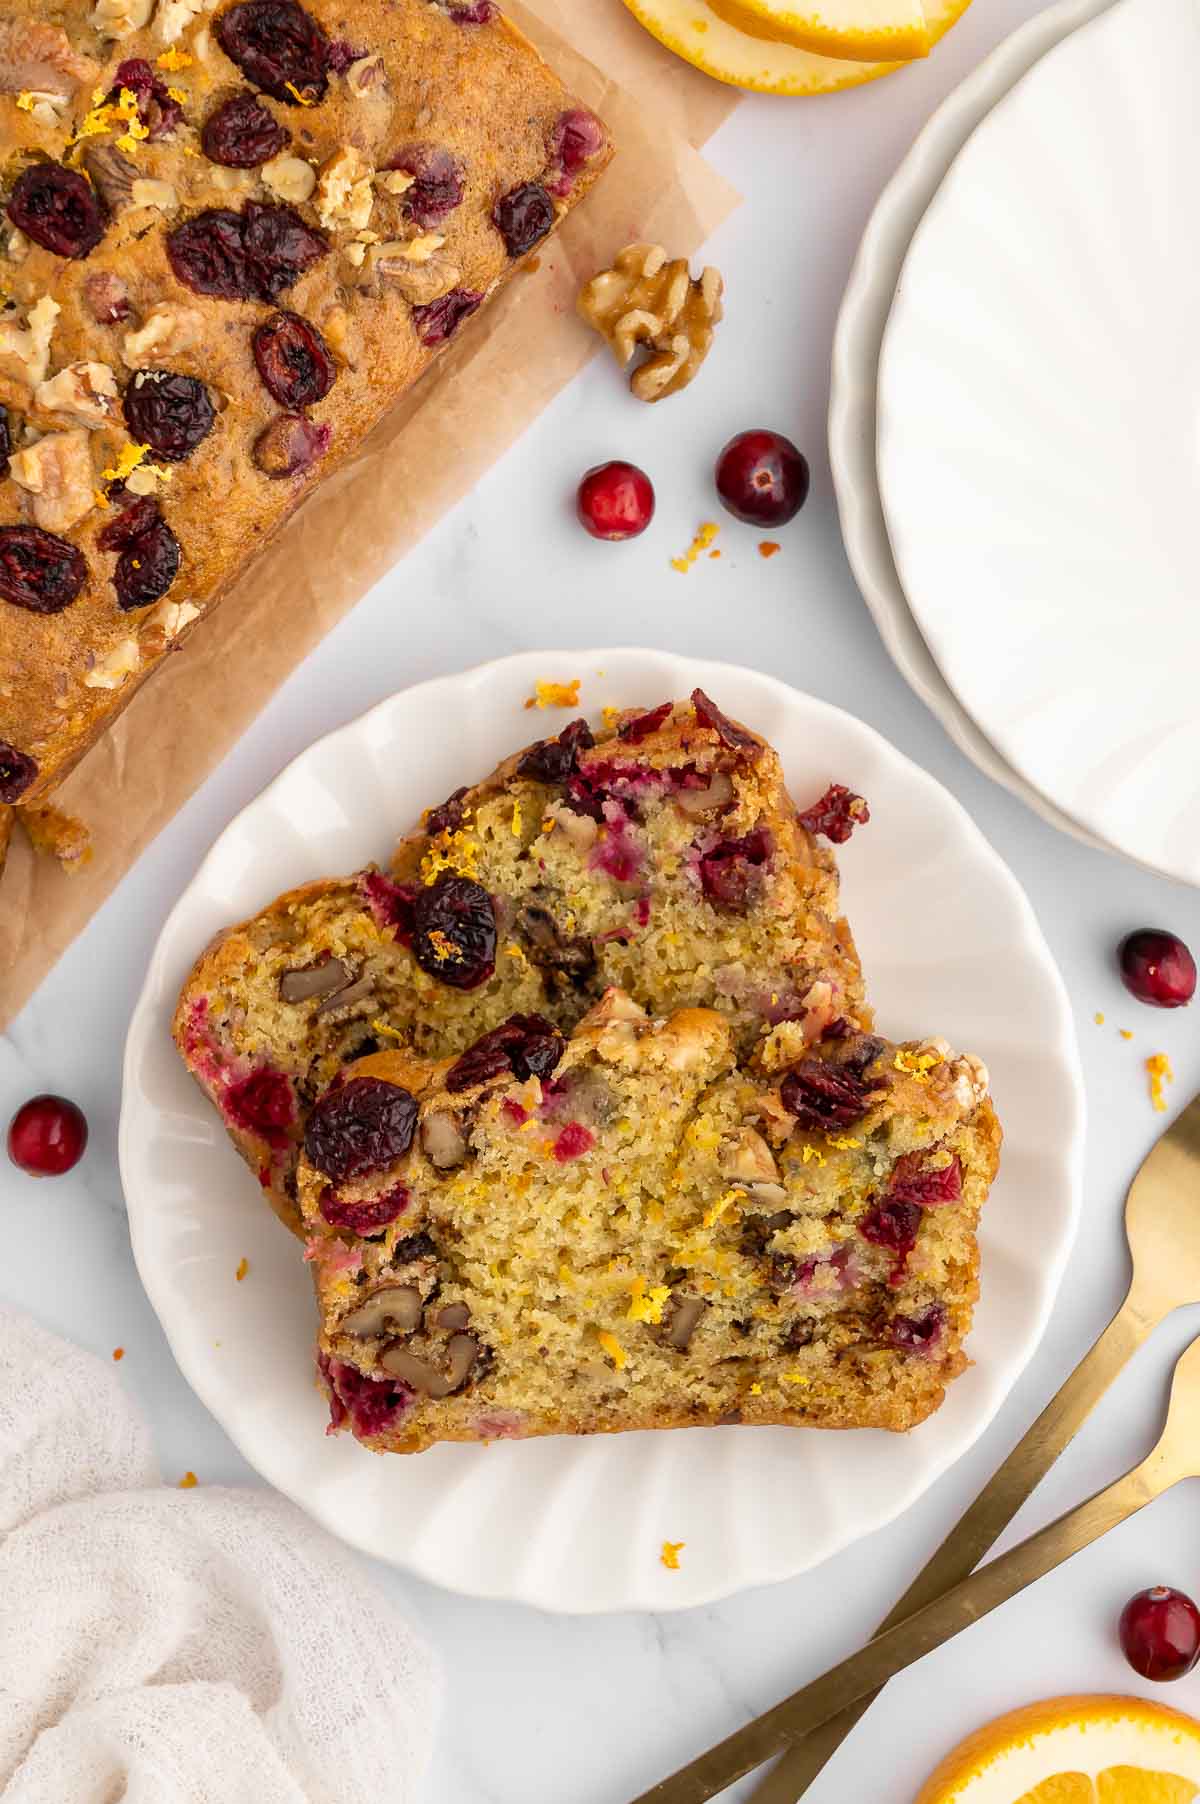 Walnut cranberry bread sliced on a plate.